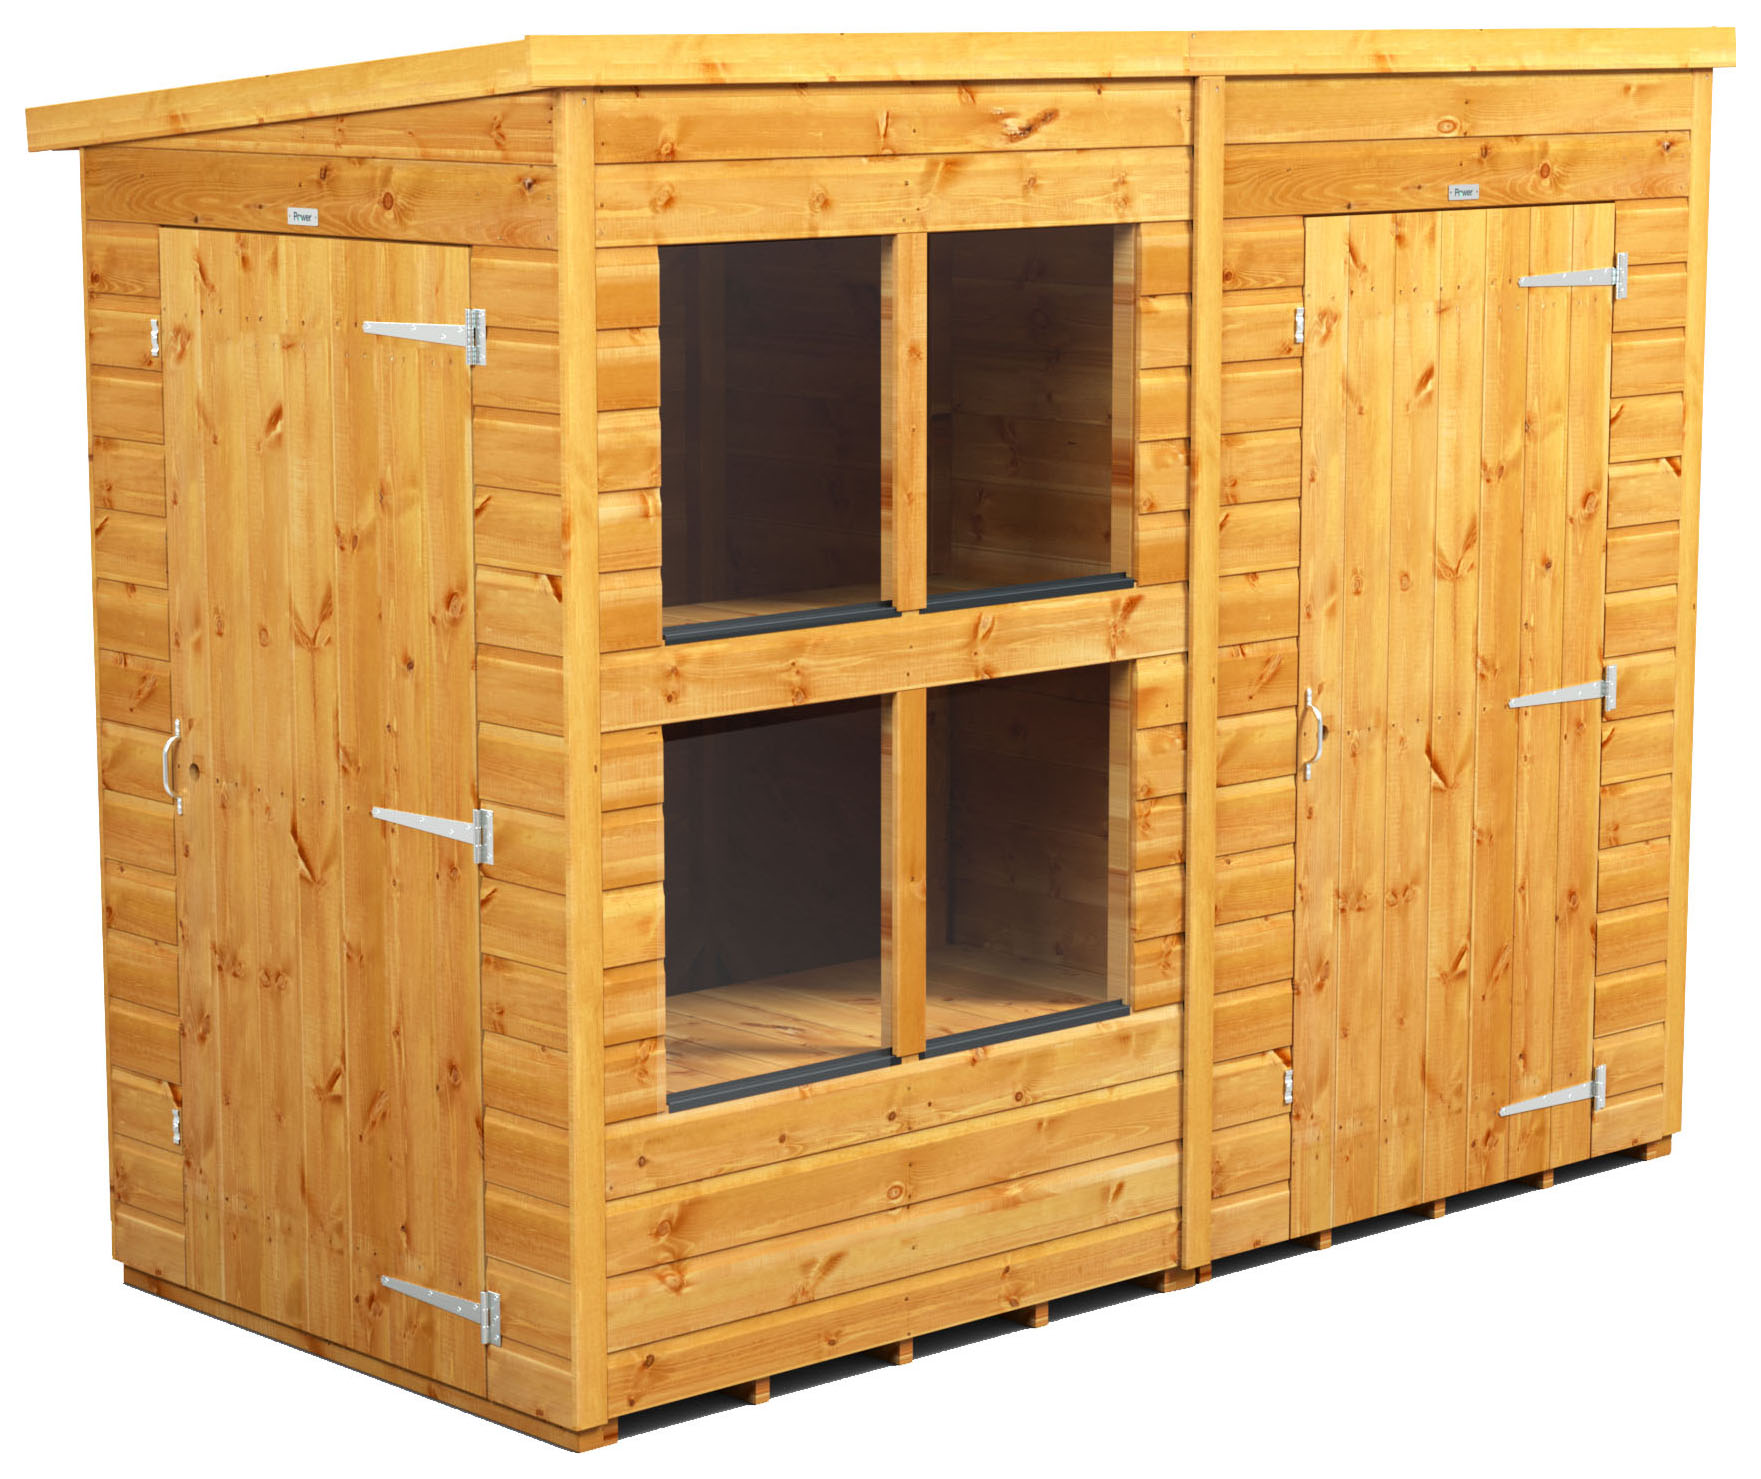 Power Sheds 8 x 4ft Pent Shiplap Dip Treated Potting Shed - Including 4ft Side Store